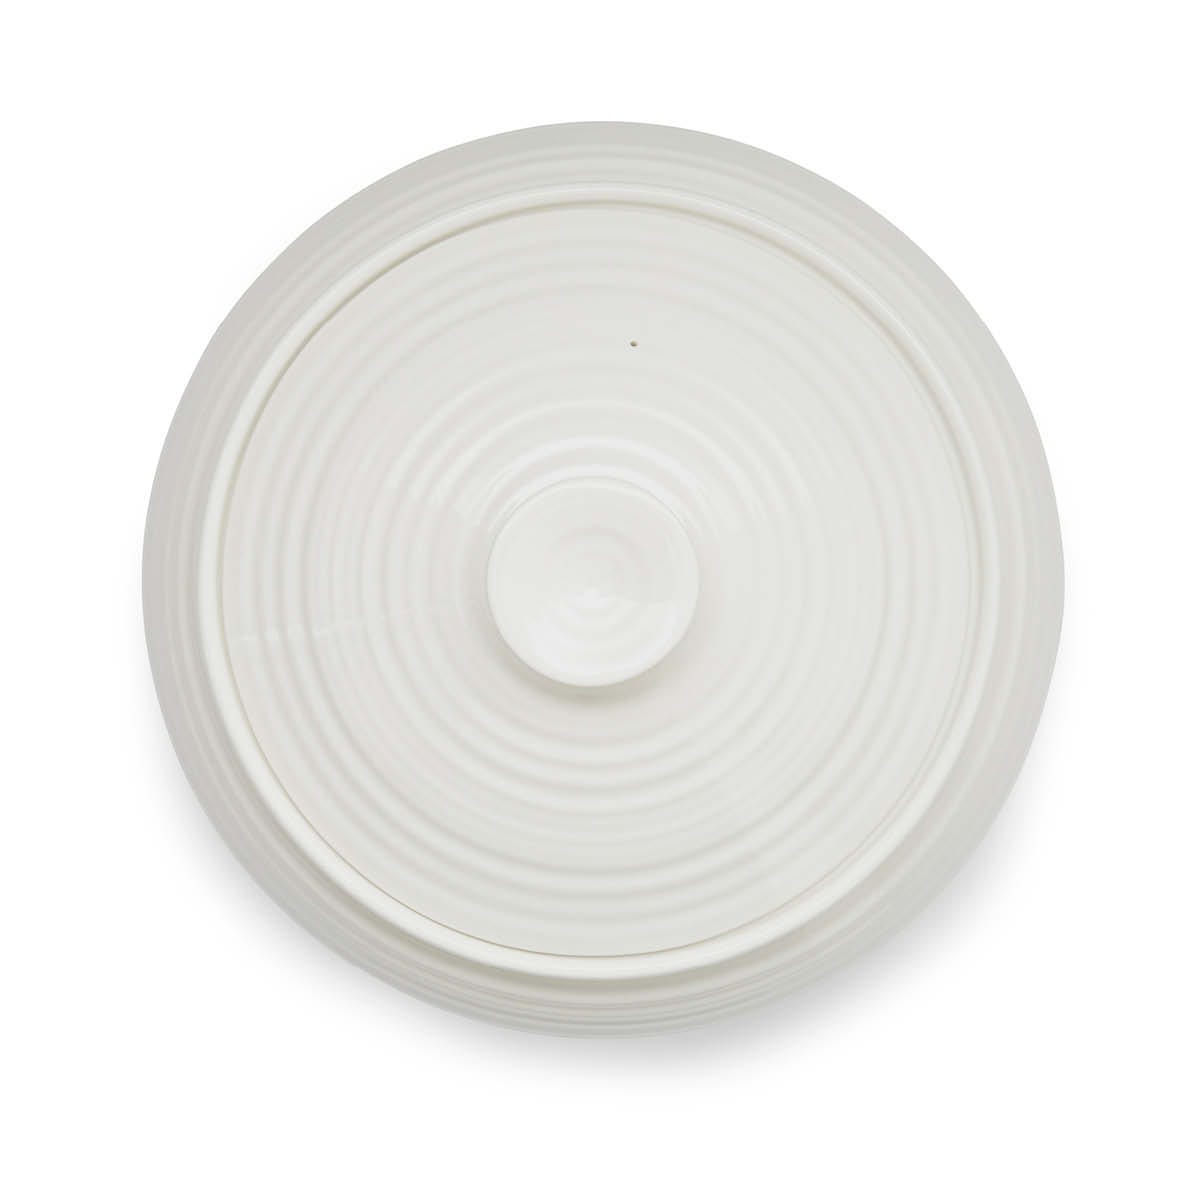 Sophie Conran for Portmeirion White Low Casserole 6 pint